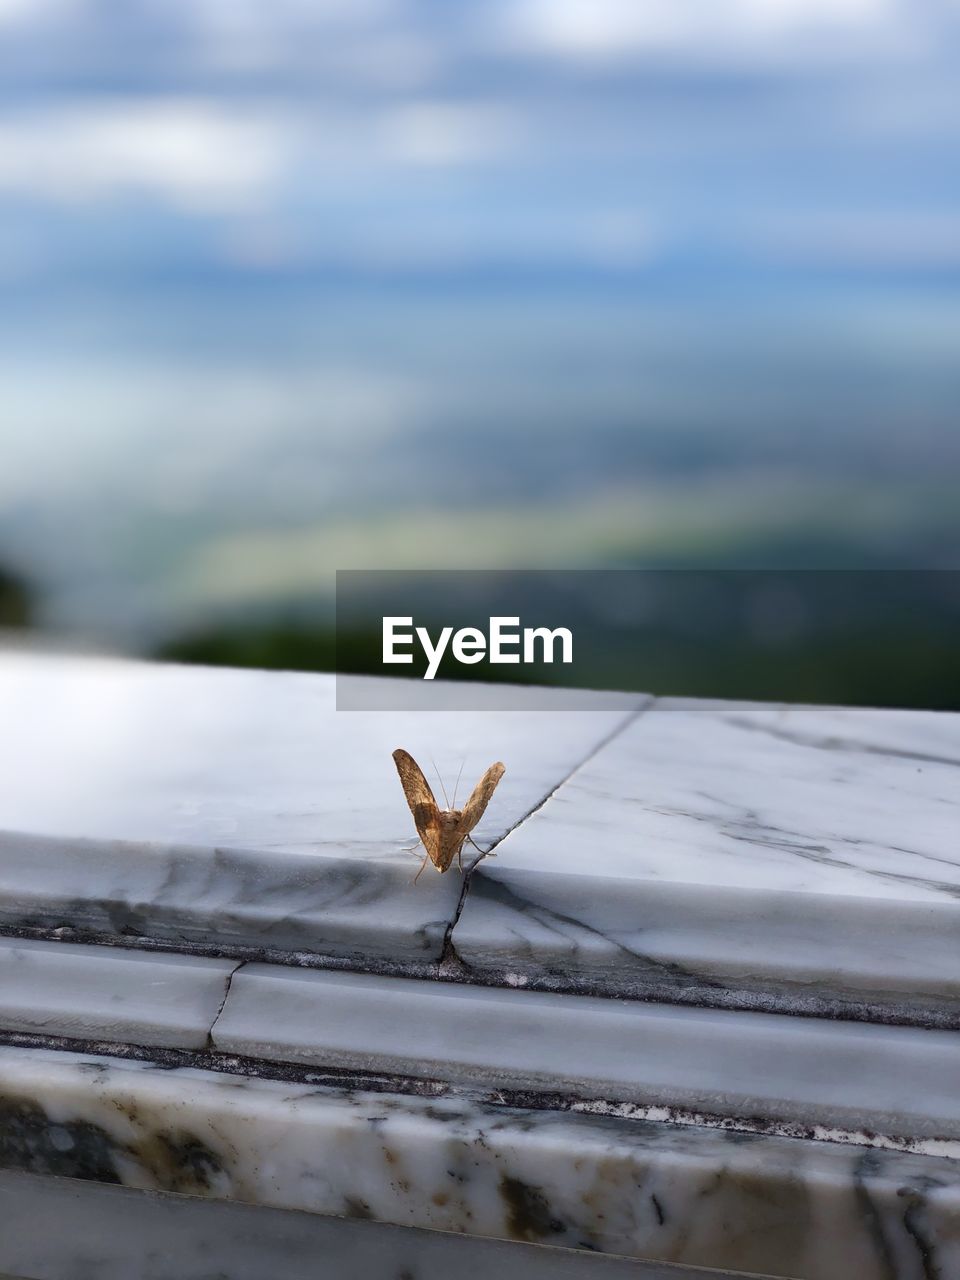 A butterfly meditates on a ledge